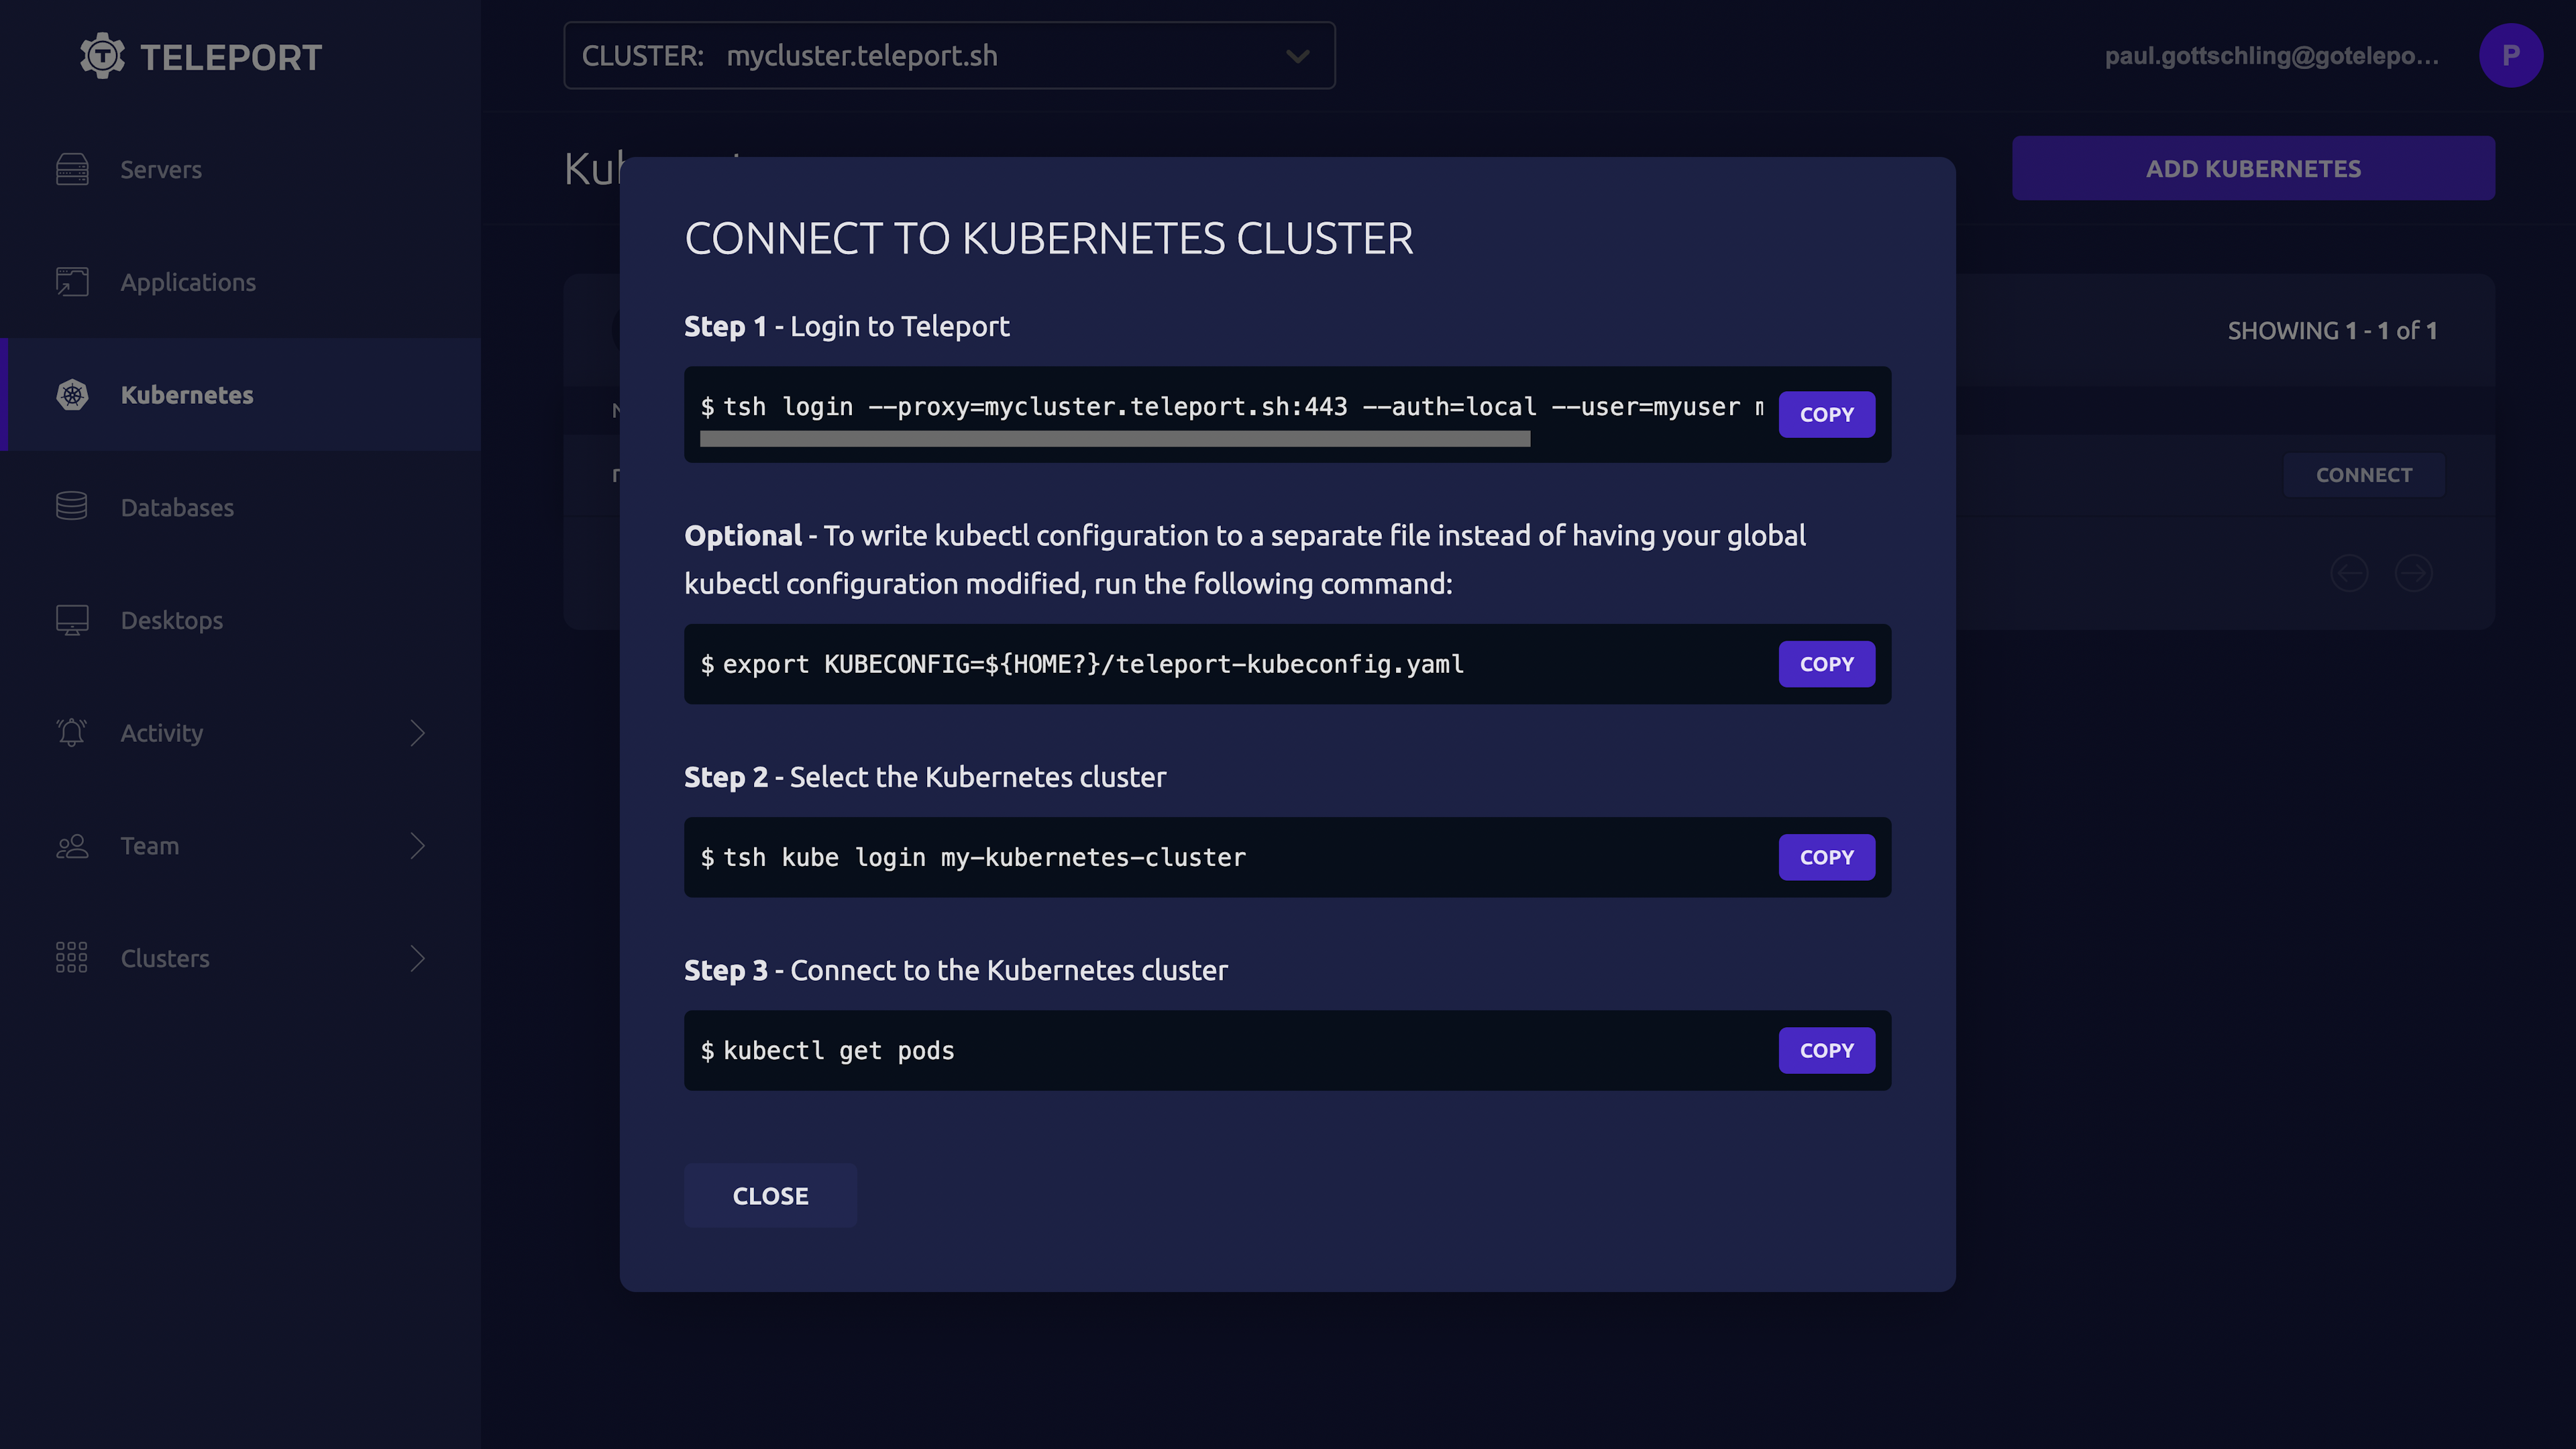 Connect to a Kubernetes
cluster